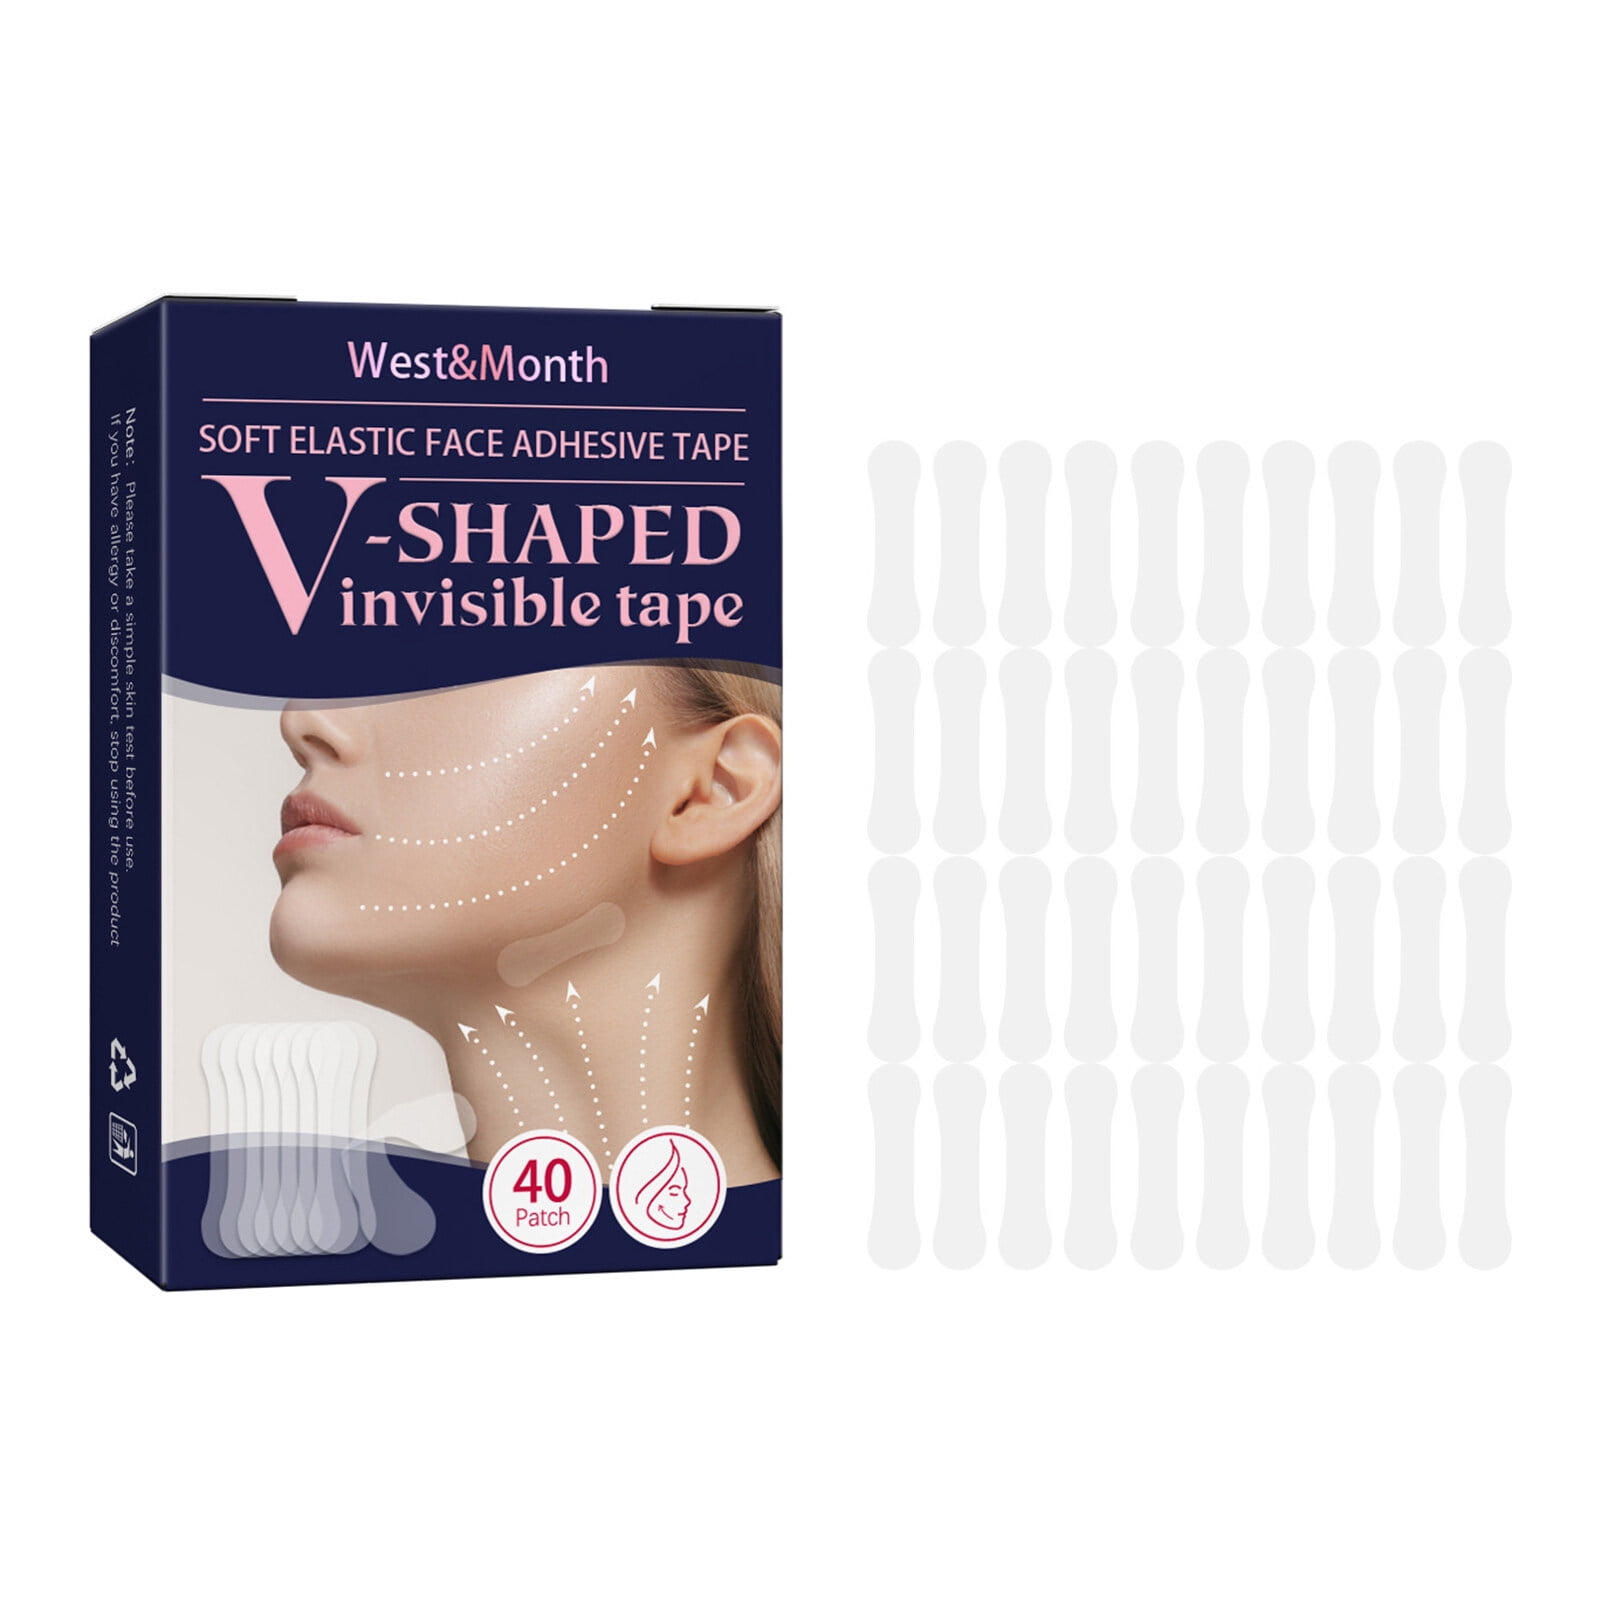 West&Month 40 Patch Soft Elastic Face Adhesive Tape V-shaped Invisible Tape  Lifting Firming Waterproof Lasting 